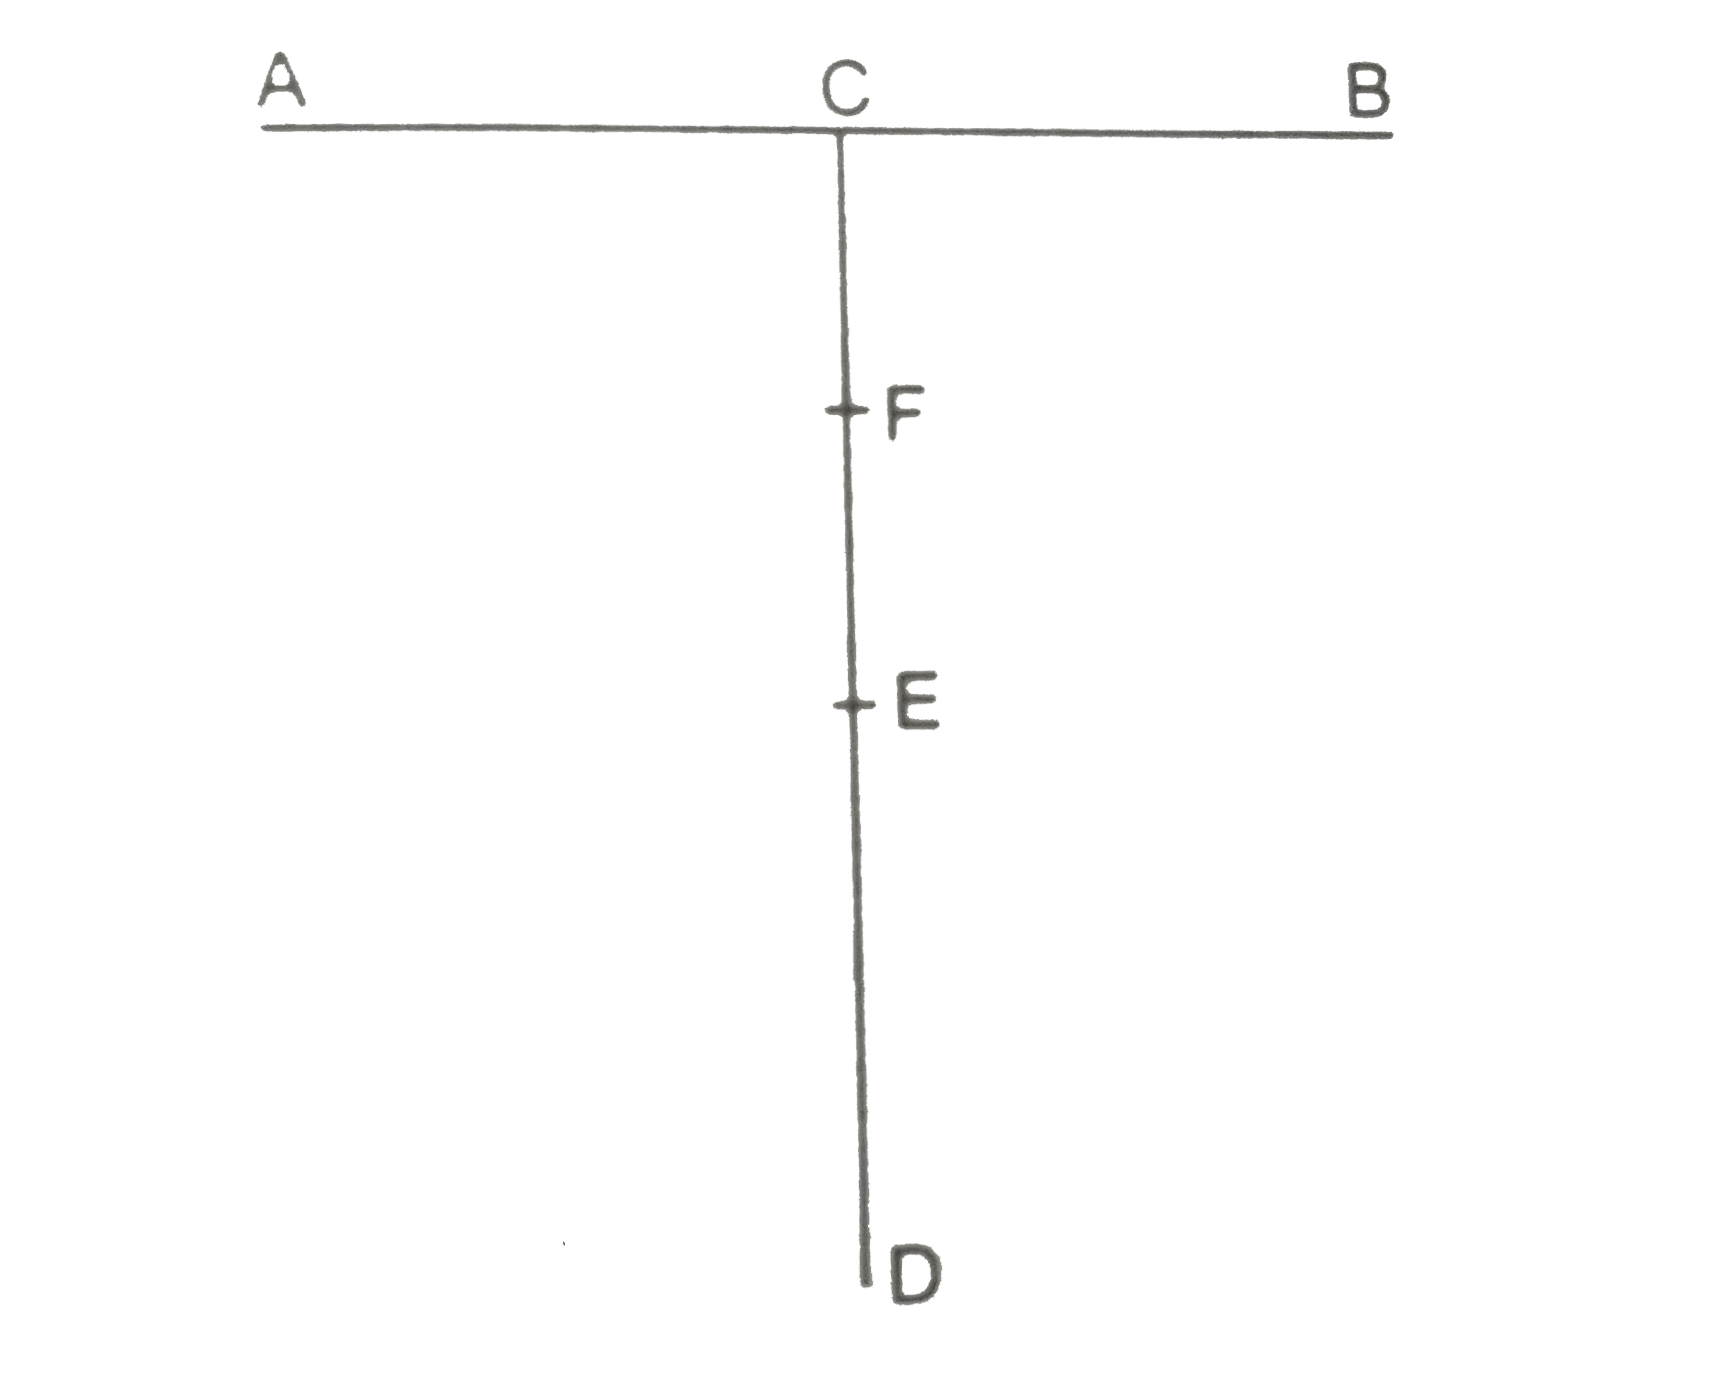 Two identical uniform rods AB and CD, each of length L are jointed to form a T-shaped frame as shown in figure. Locate the centre of mass of the frame. The centre of mass of a uniform rod is at the middle point of the rod.